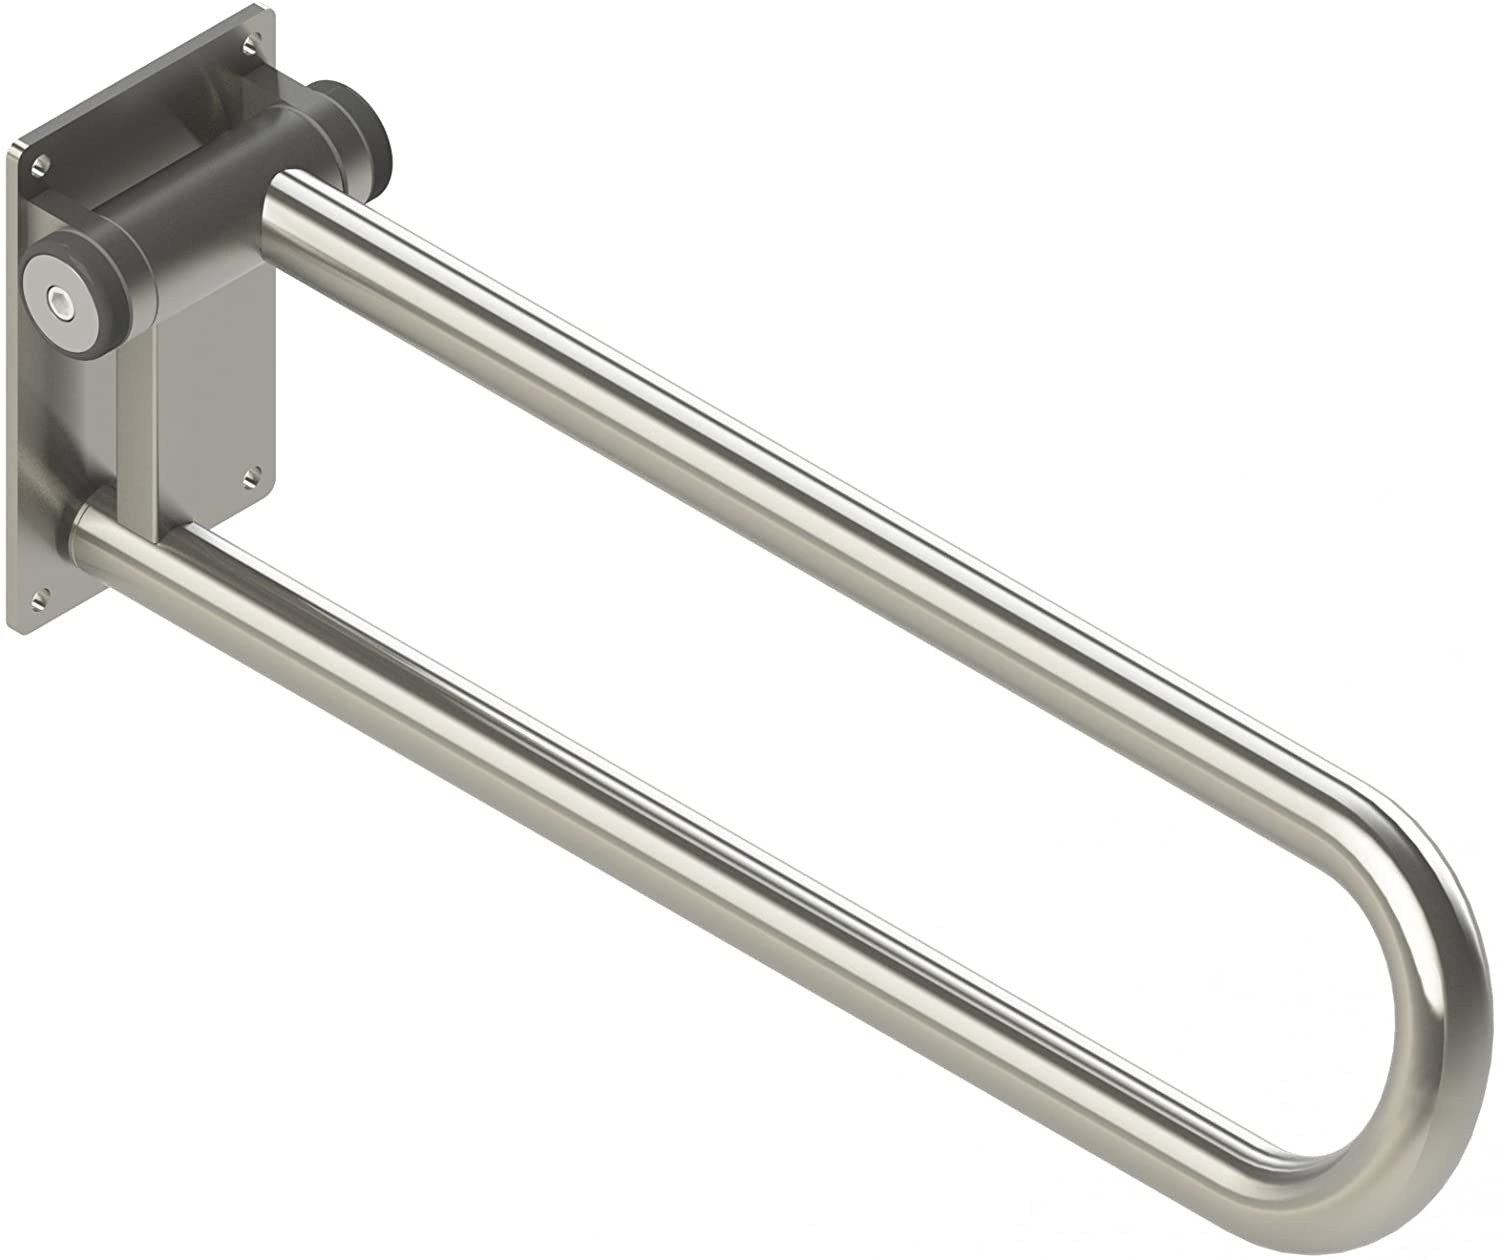 HealthCraft,PT-WR32L-SS,Stainless Steel,Stainless Steel,32"